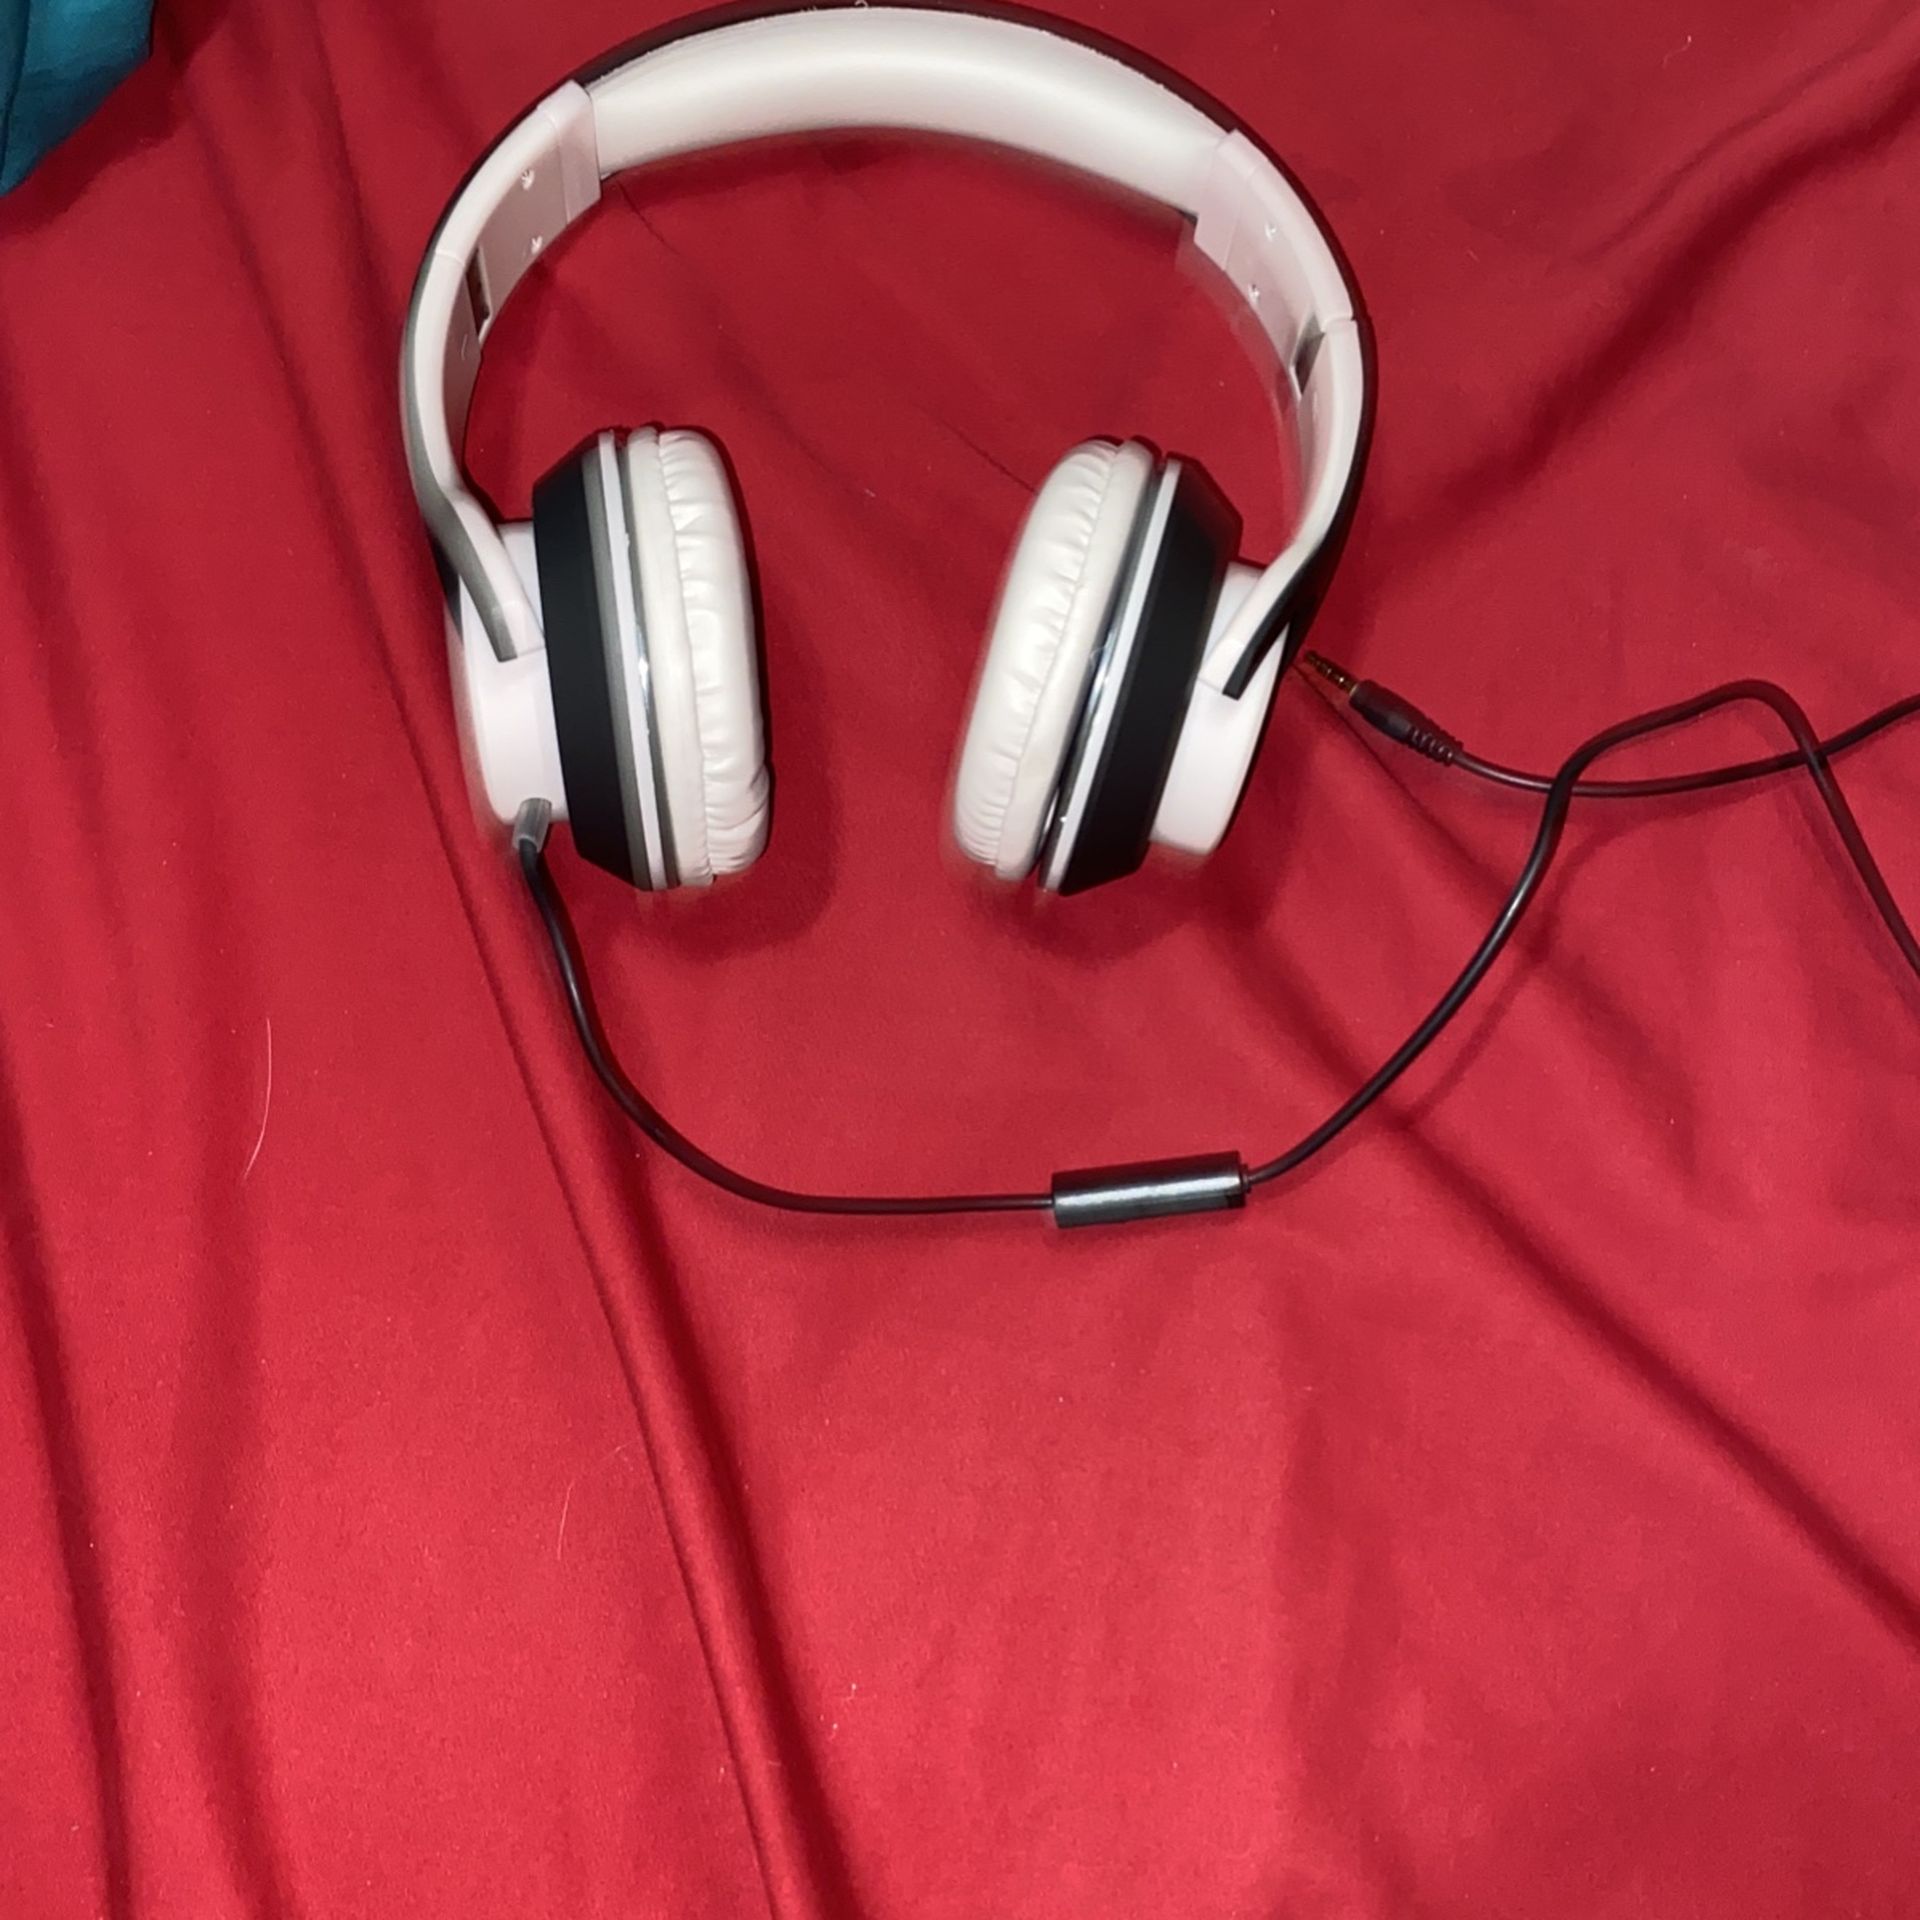 Headphones with cable